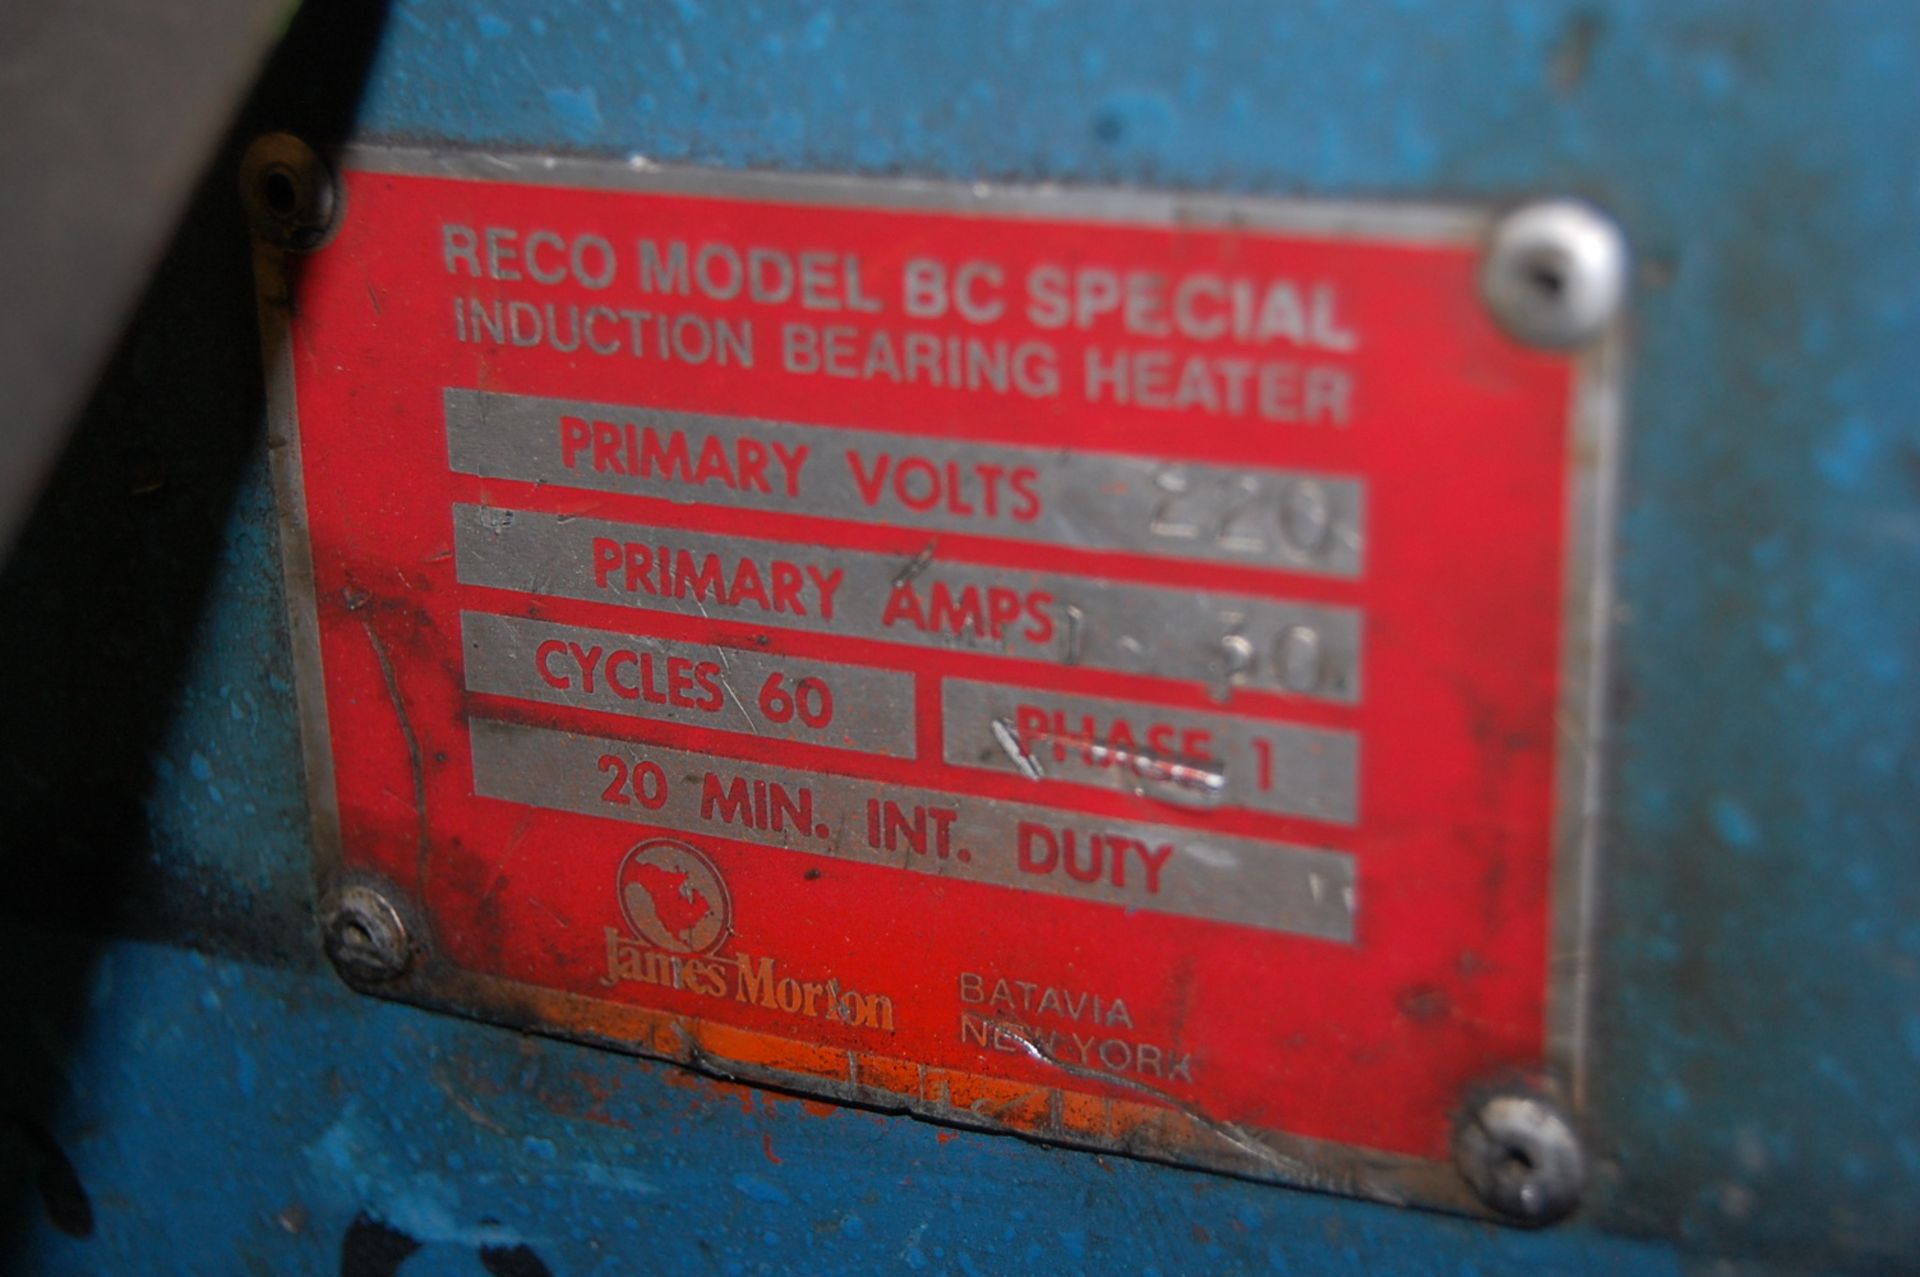 Reco Model BC Special 12" Wide Induction Heater - Image 2 of 2